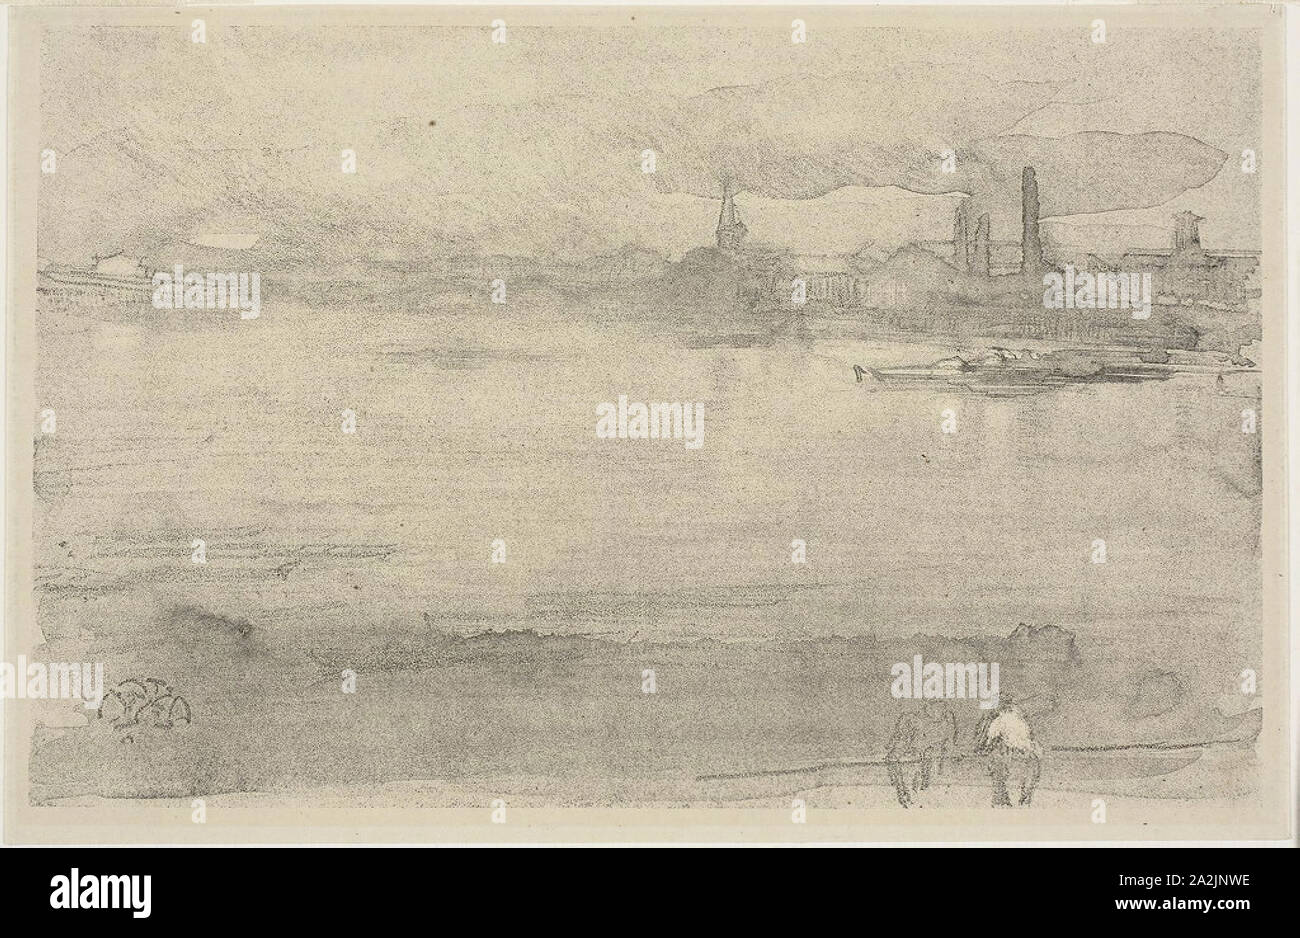 Early Morning, 1878, James McNeill Whistler, American, 1834-1903, United States, Lithotint with scraping, on a prepared half-tint ground, in black ink on cream wove paper, 165 x 259 mm (image), 177 x 270 mm (sheet Stock Photo